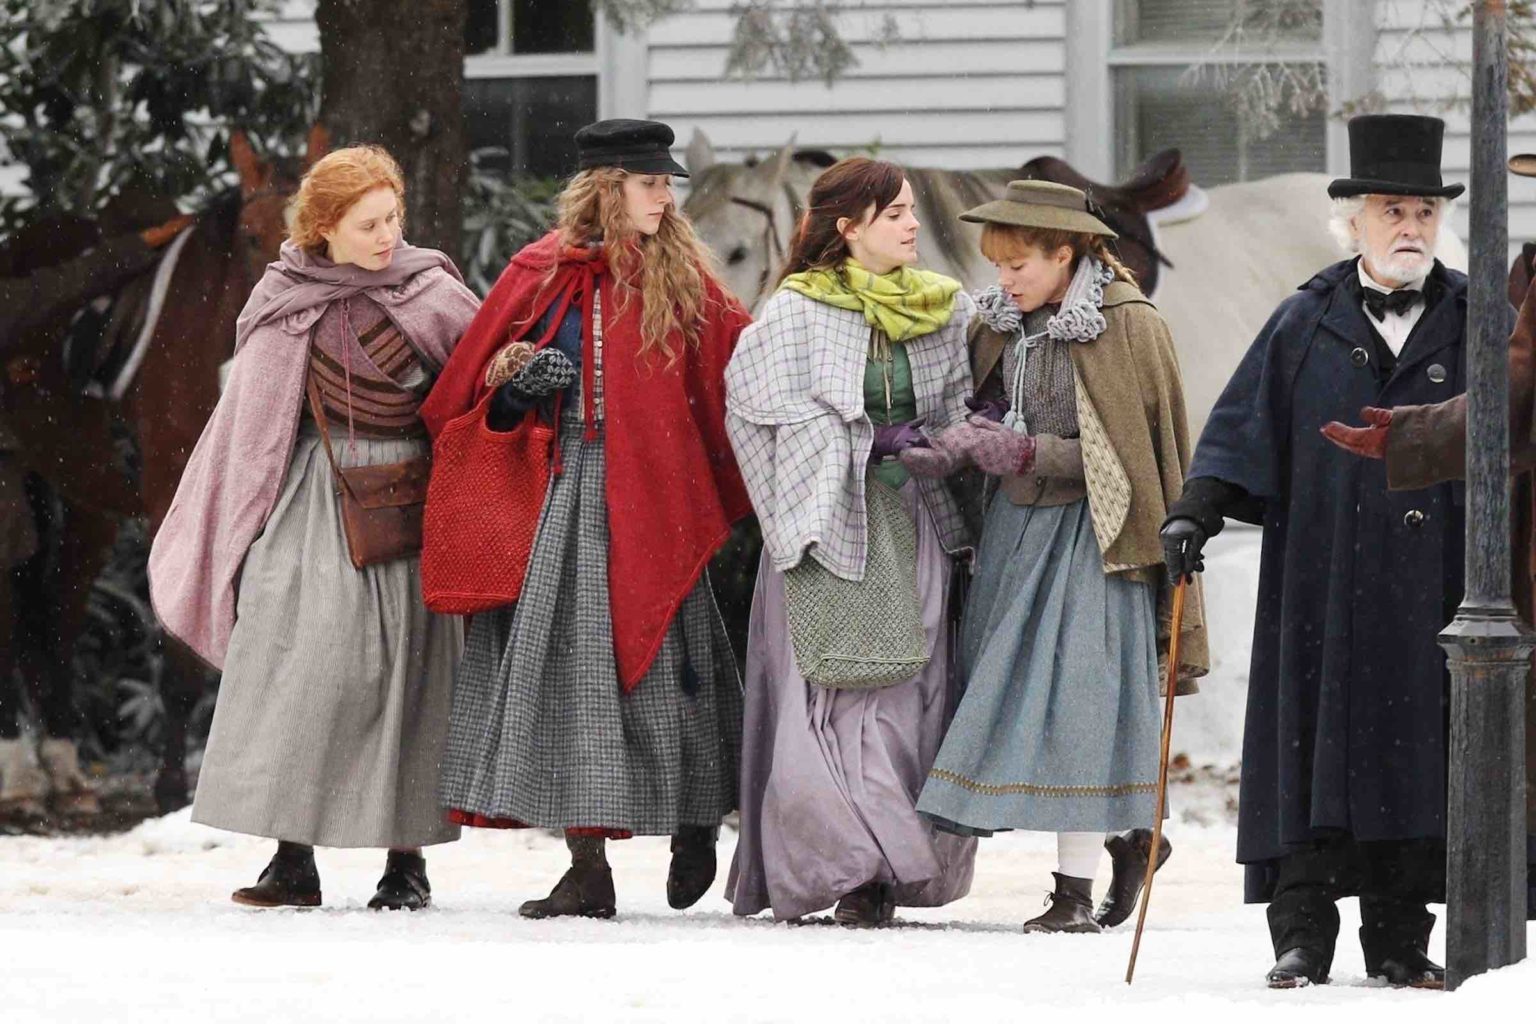 Greta Gerwig’s adaptation of 'Little Women' is raking in the Oscar nominations. Here's why 'Little Women' deserves the Oscars.